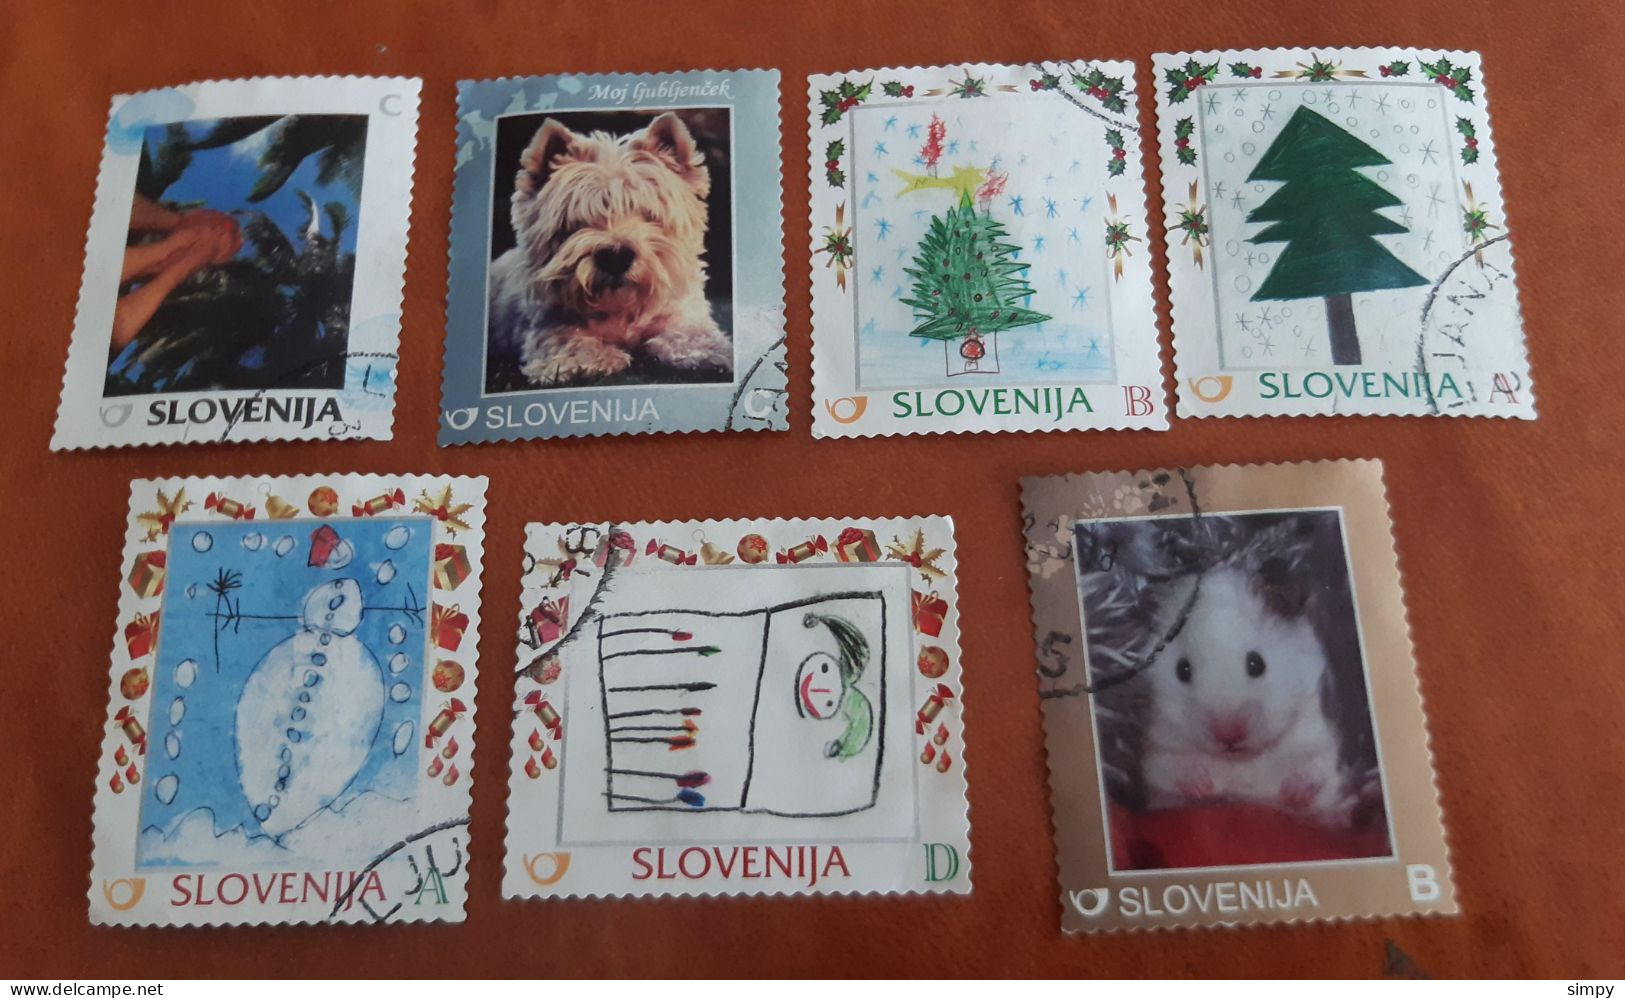 SLOVENIA 2014 - Personalized Used Stamps - Eslovenia